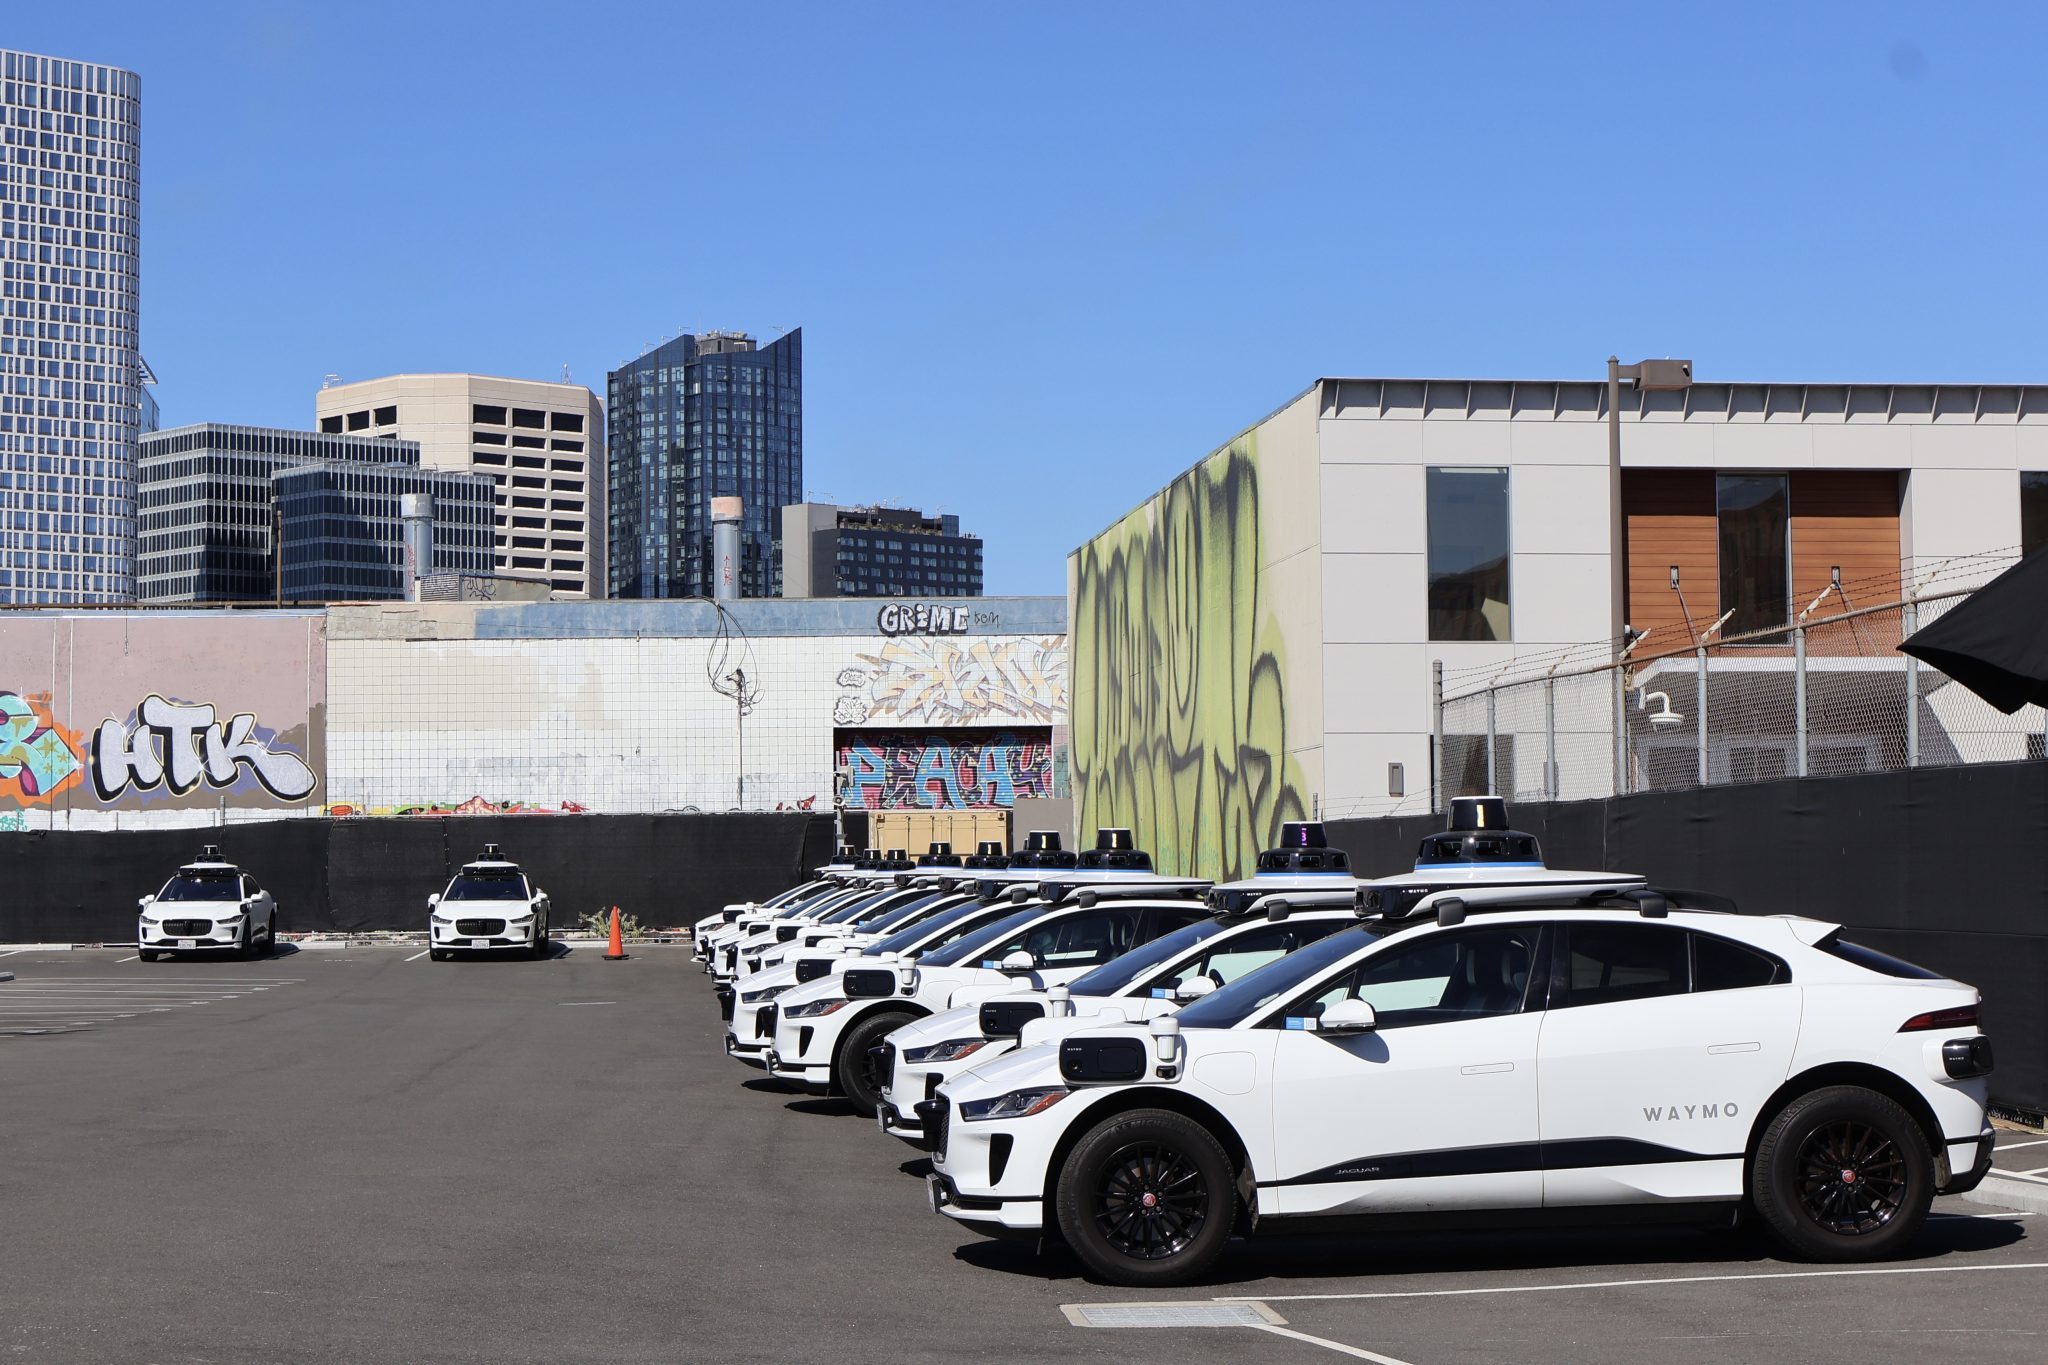 Waymo cars parked in a parking lot